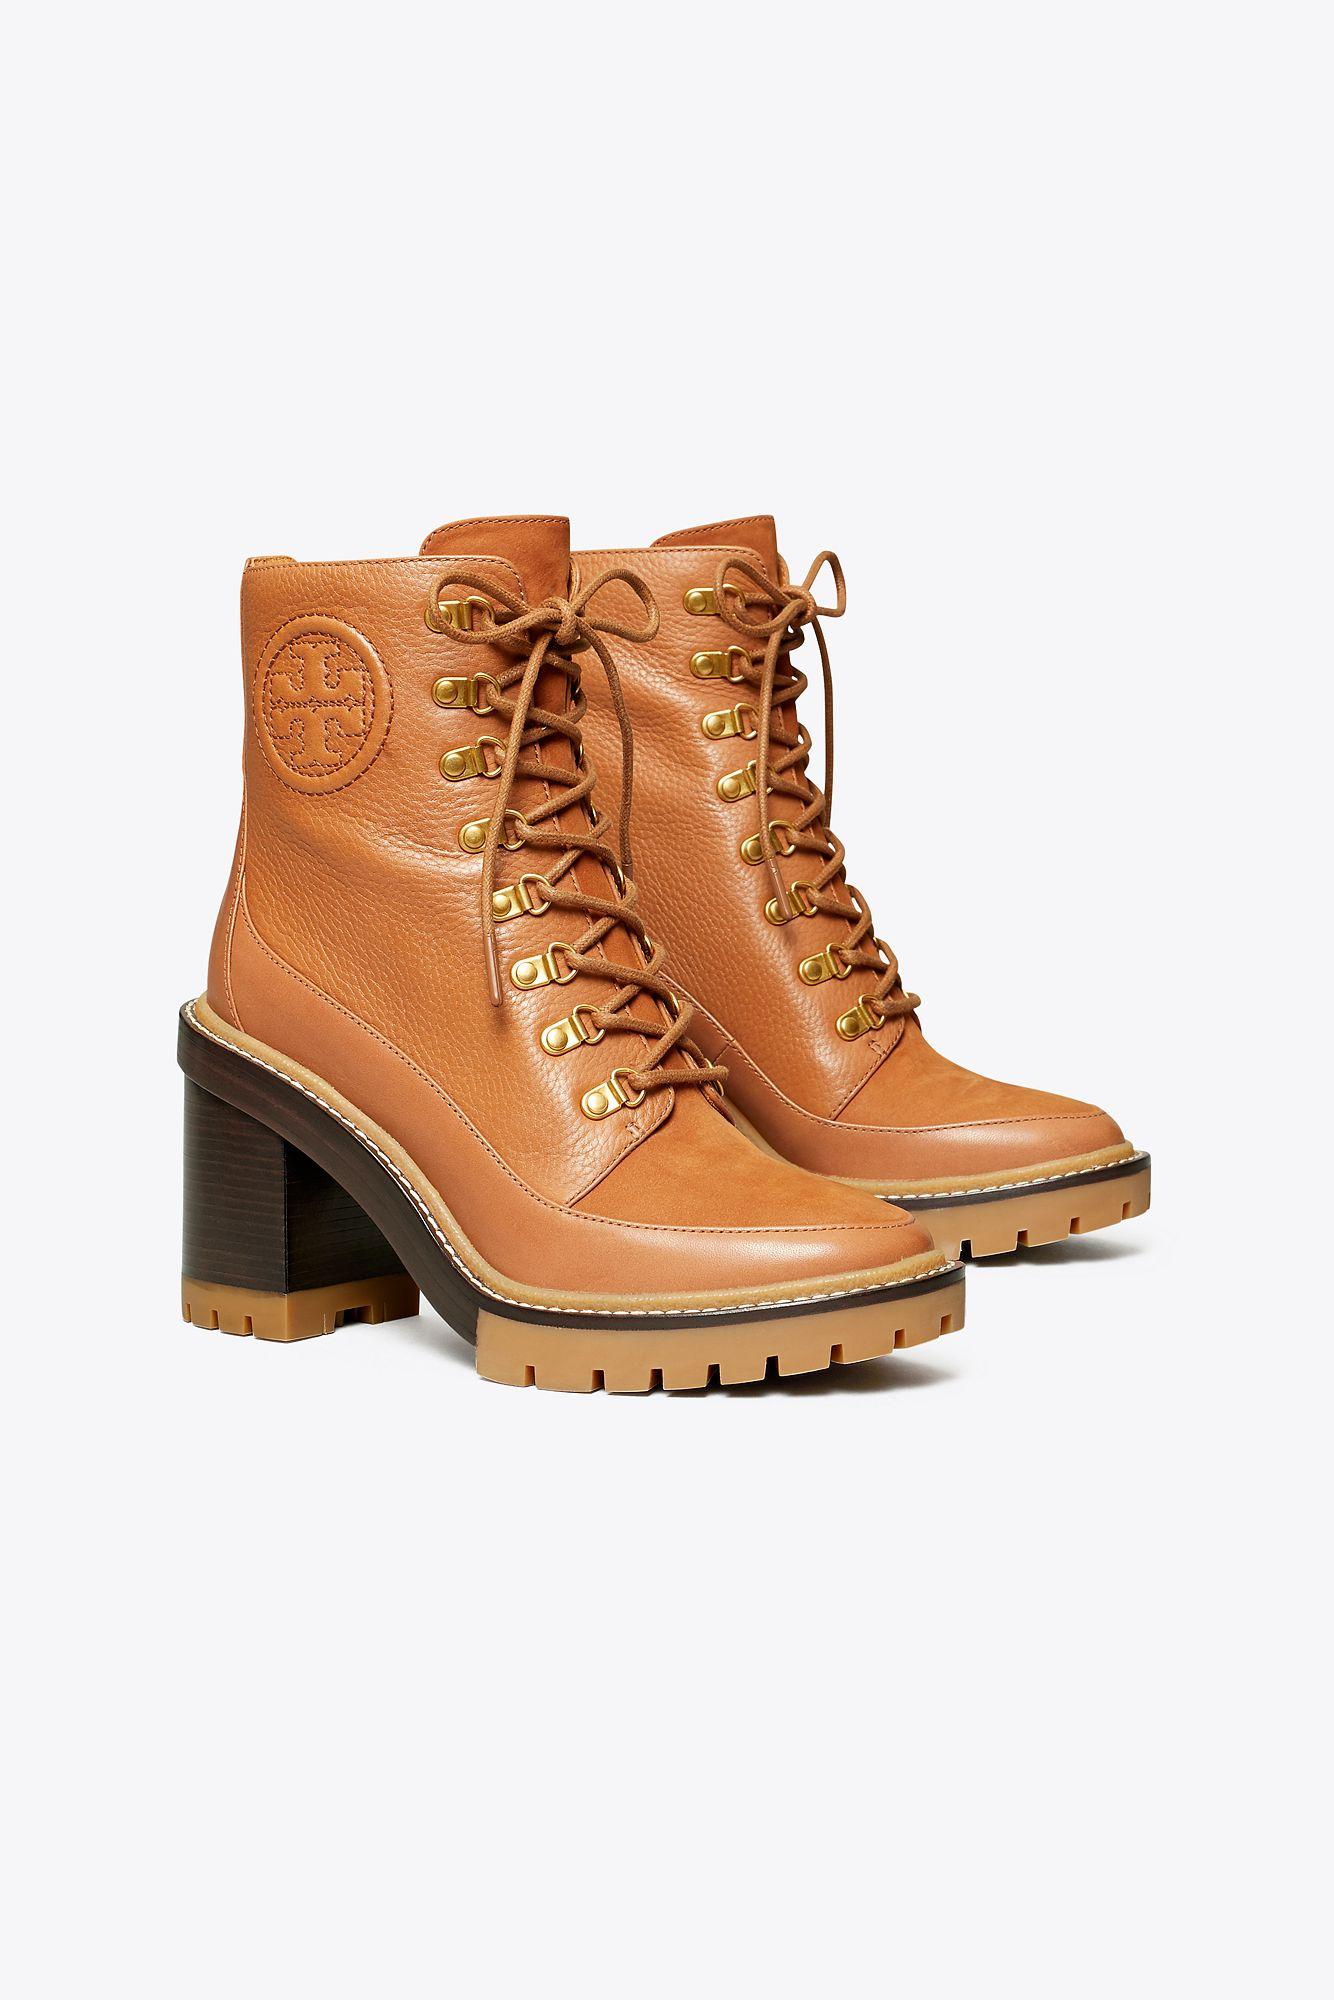 Tory Burch Miller Mixed-materials Lug Sole Boot in Brown | Lyst